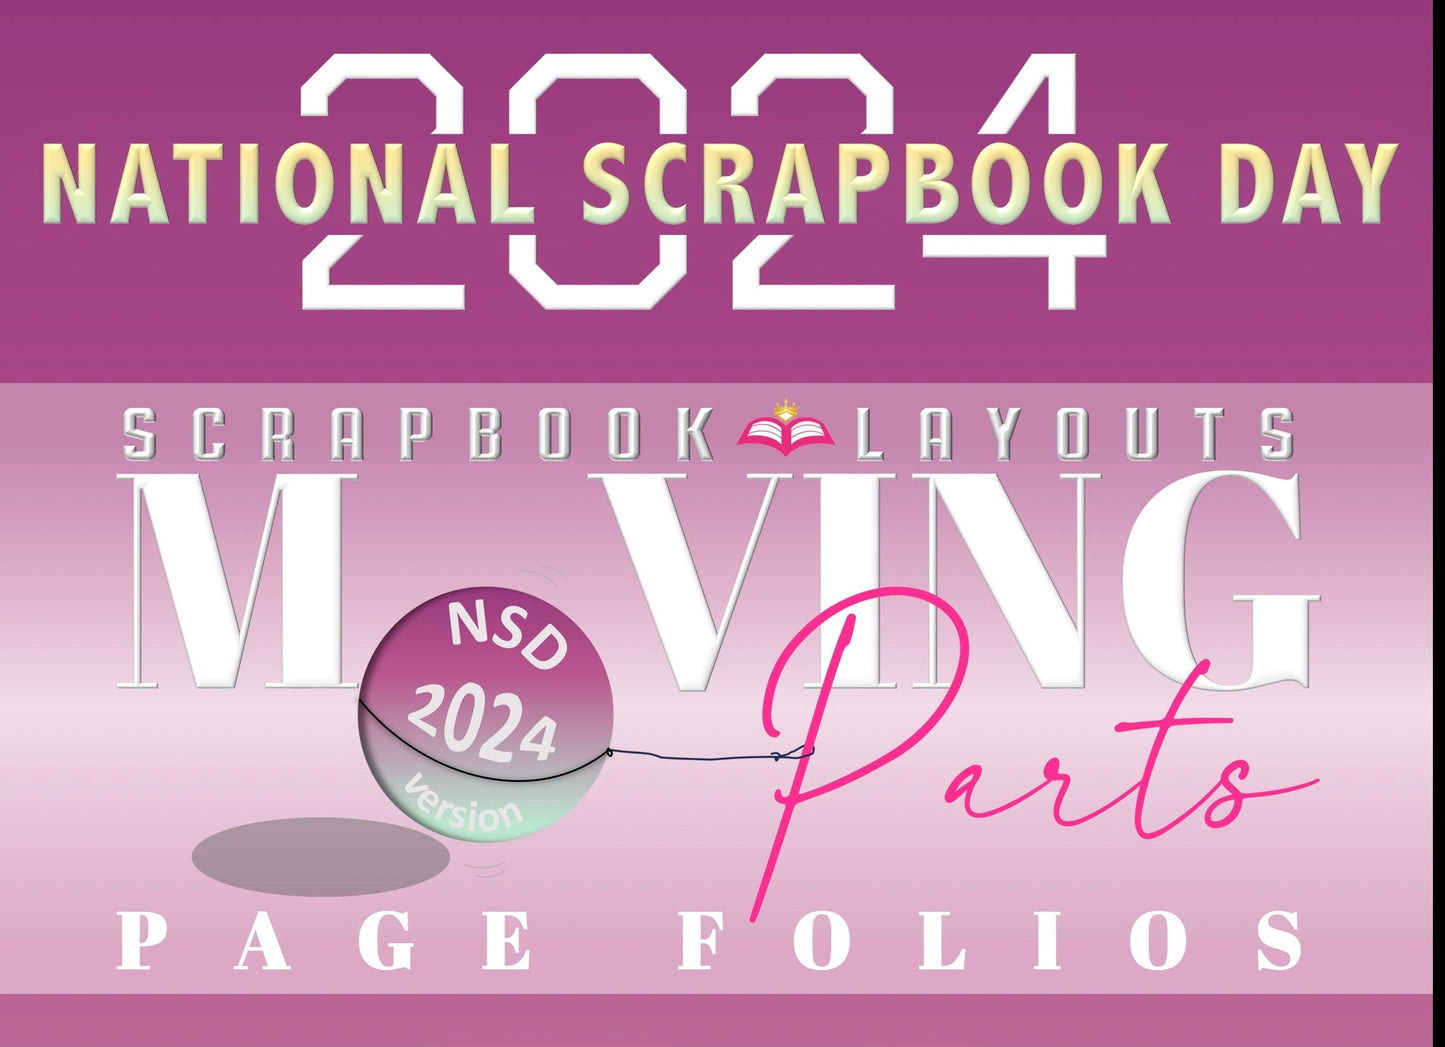 Moving Parts Page Folios Workshop - National Scrapbook Day (NSD) 2024